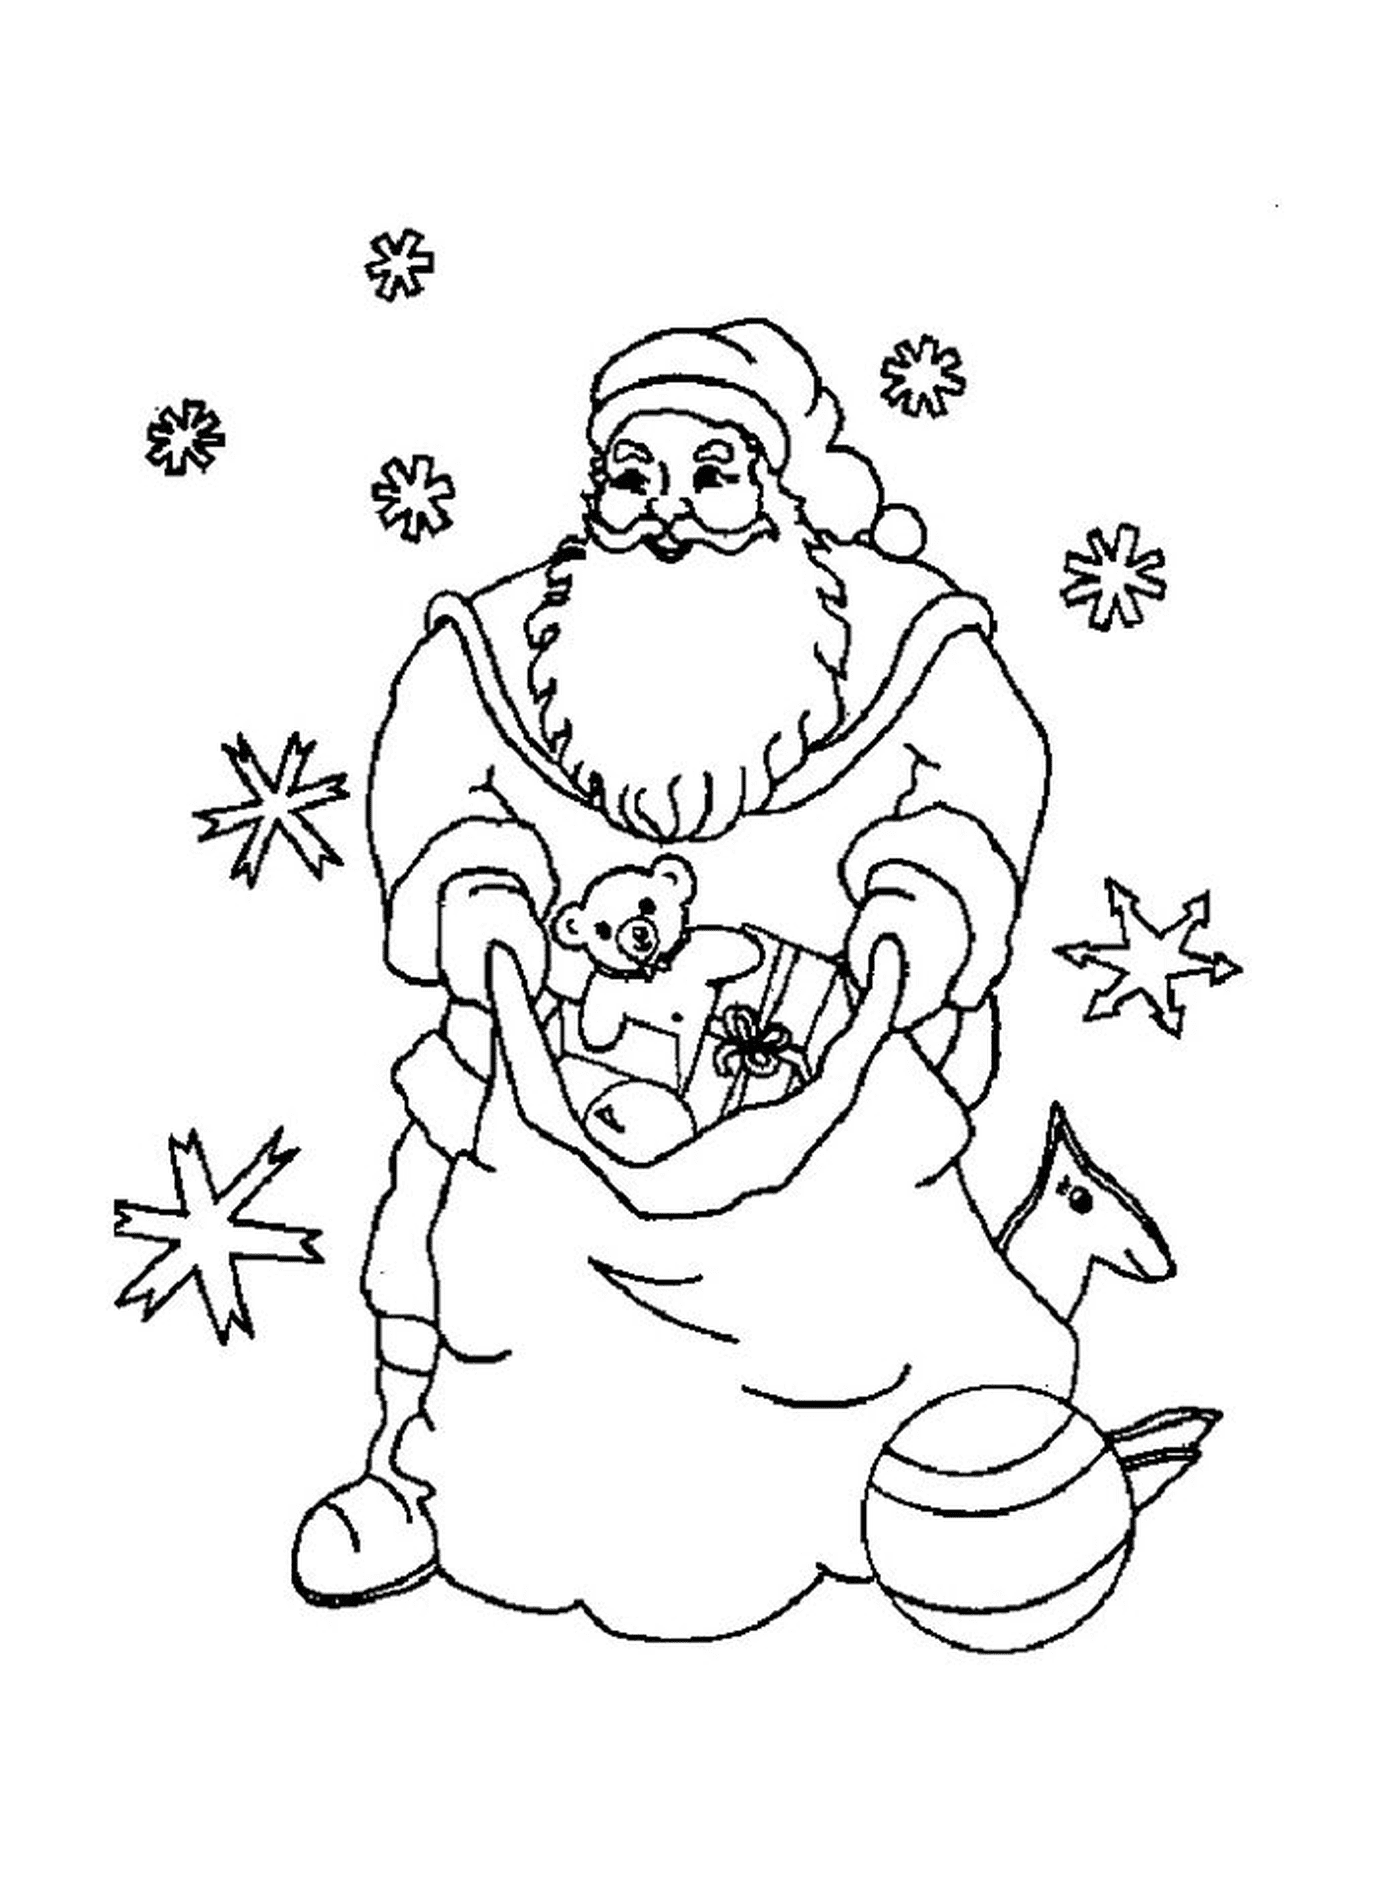  Santa Claus with stars and gifts 